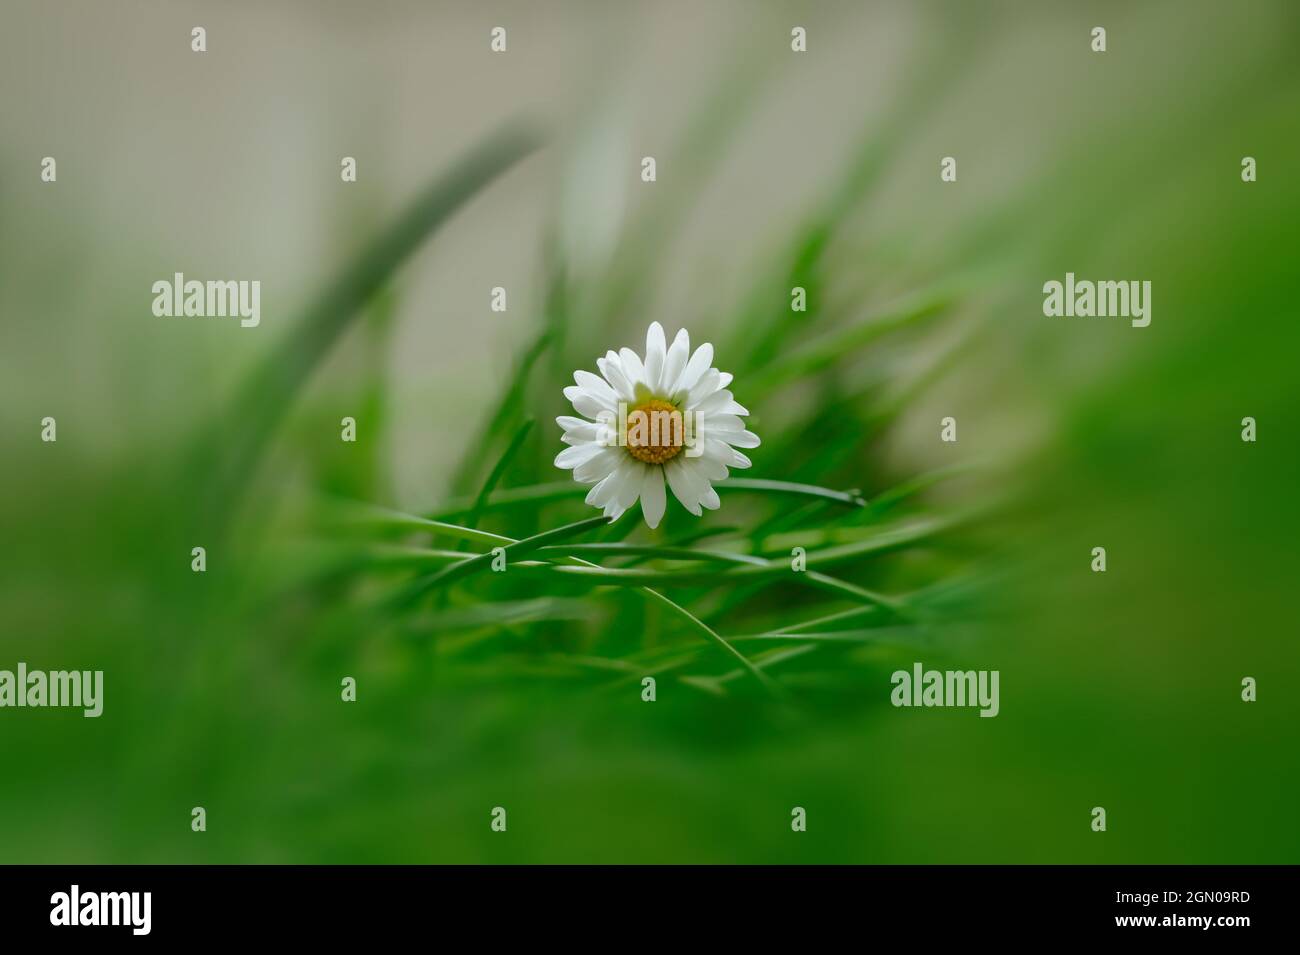 A daisy, Bellas perennis, blooms in a green meadow Stock Photo